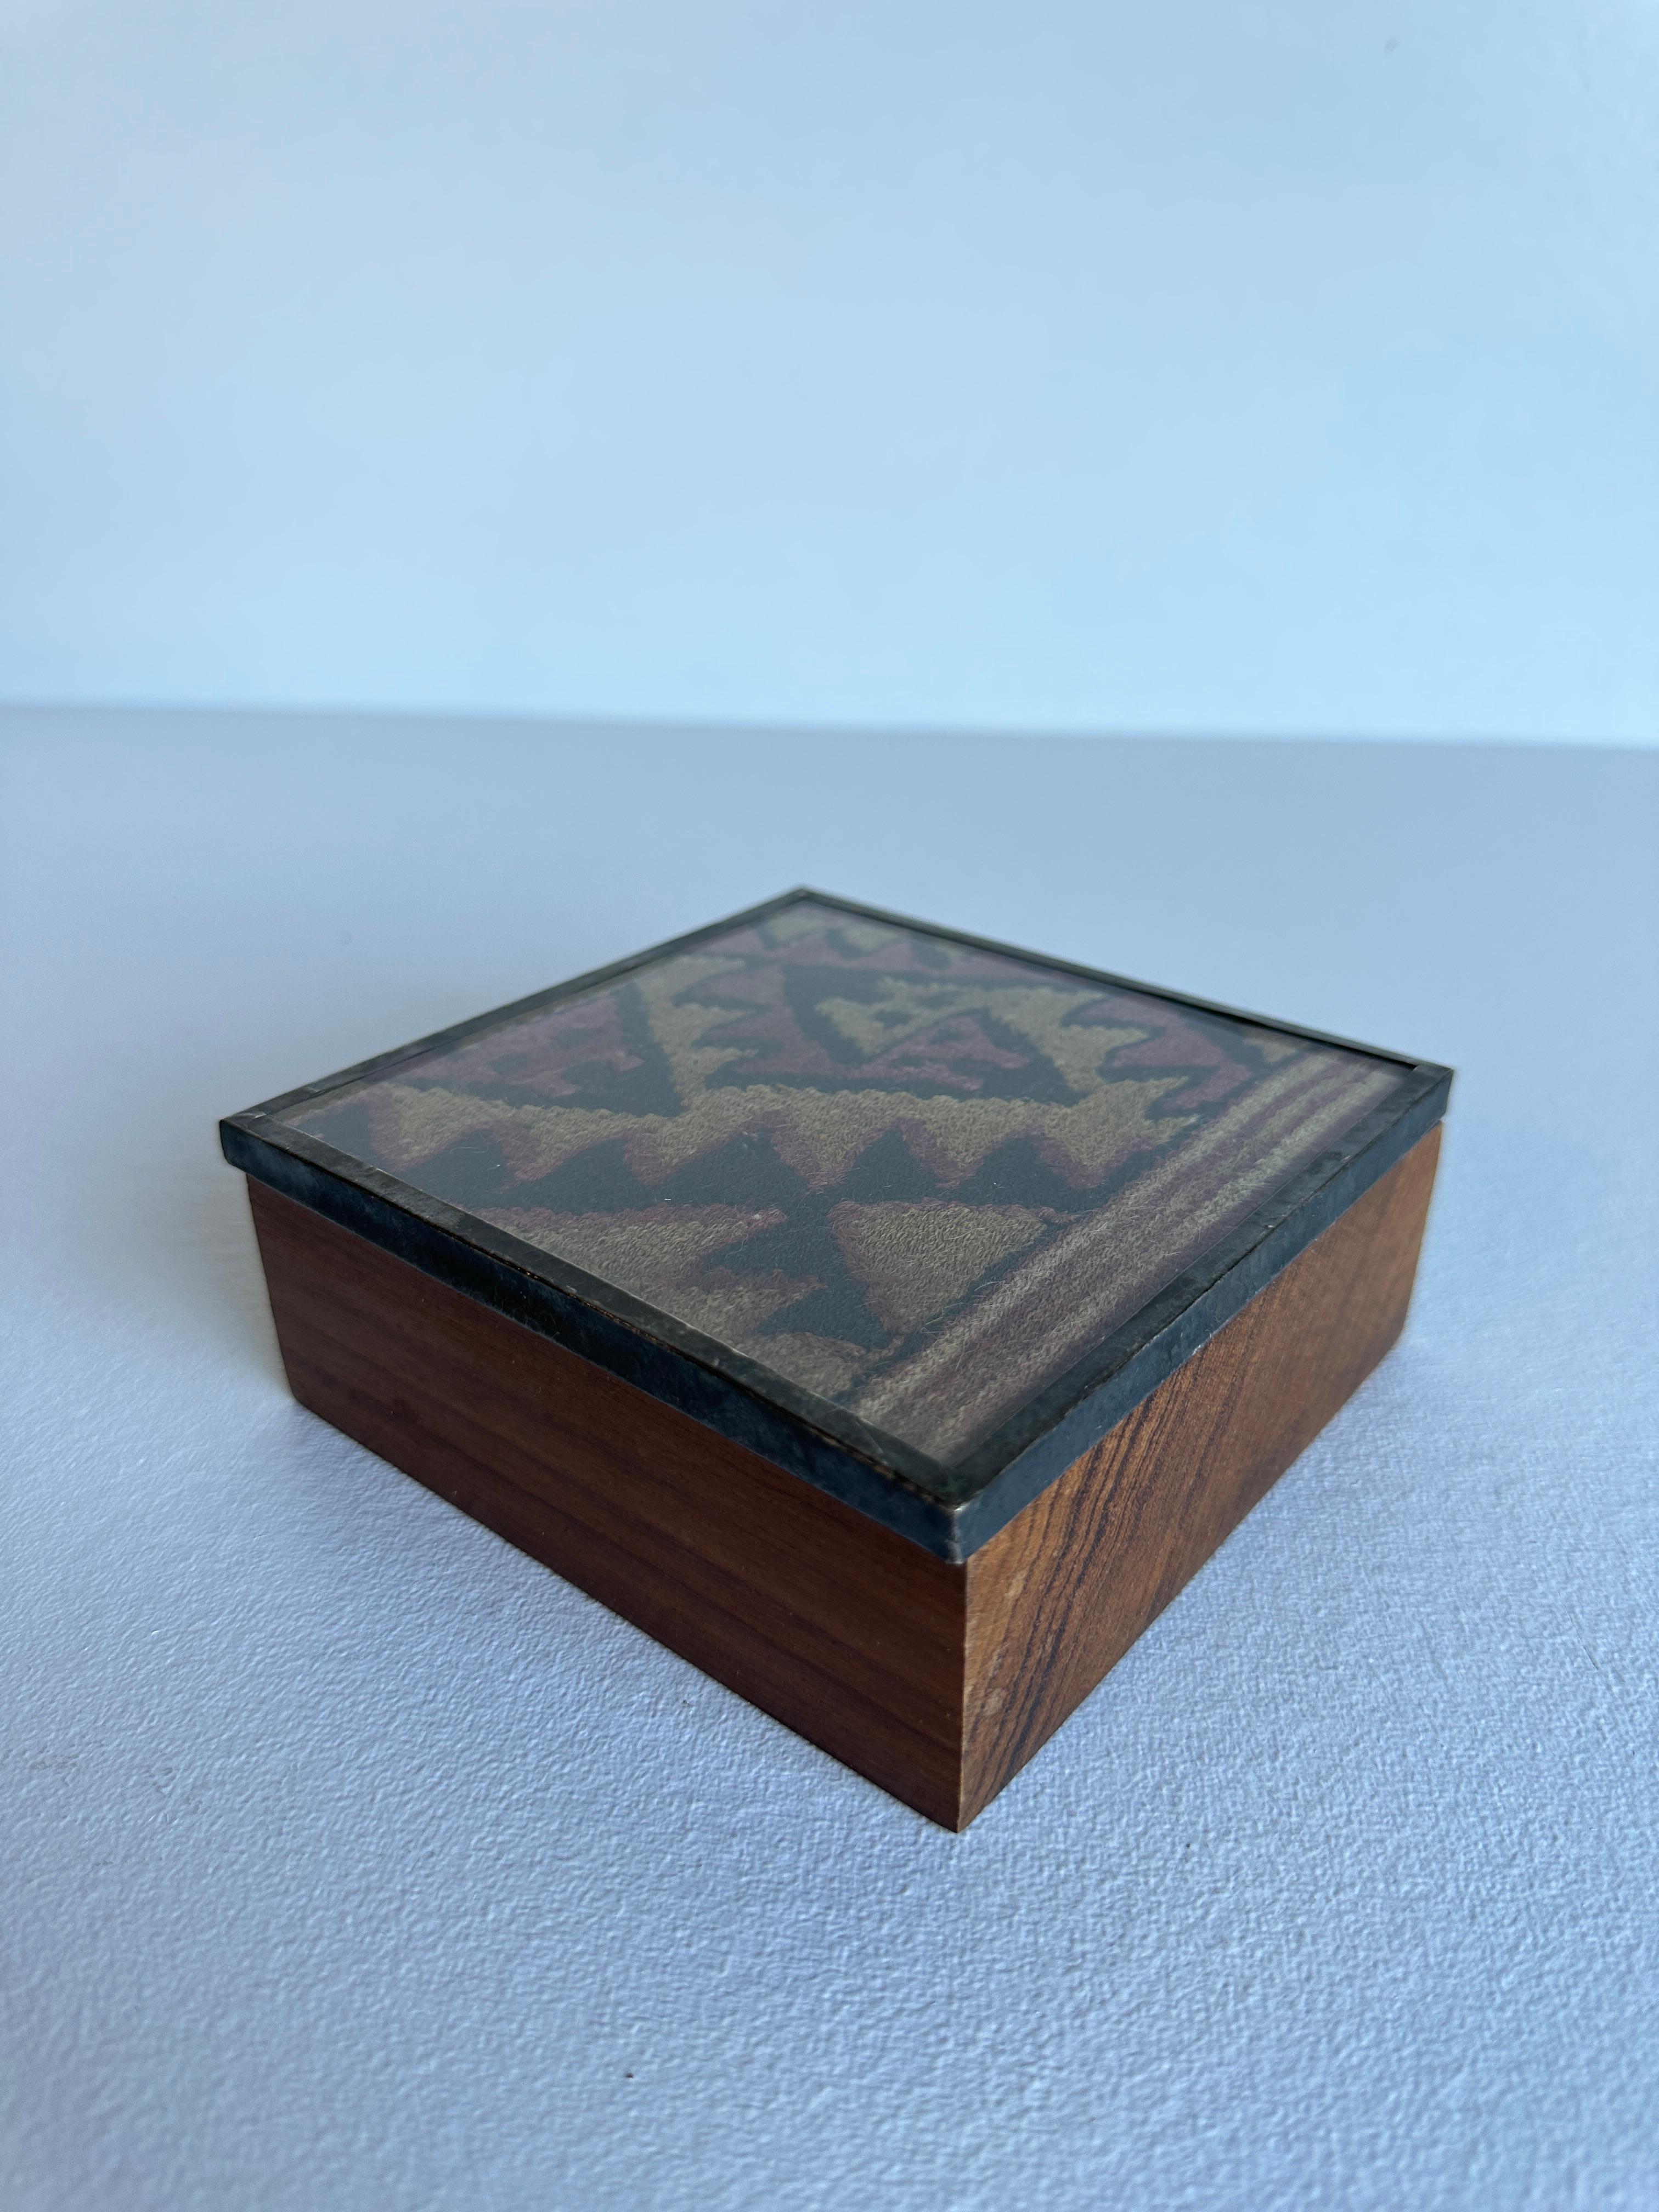 Set of 2 Wood and Sterling Silver Boxes with Pre-Columbian Fabric Remnants 

Box #1 measures 6 x4.5x1.5”
Box #2 measures 5x5x2” 